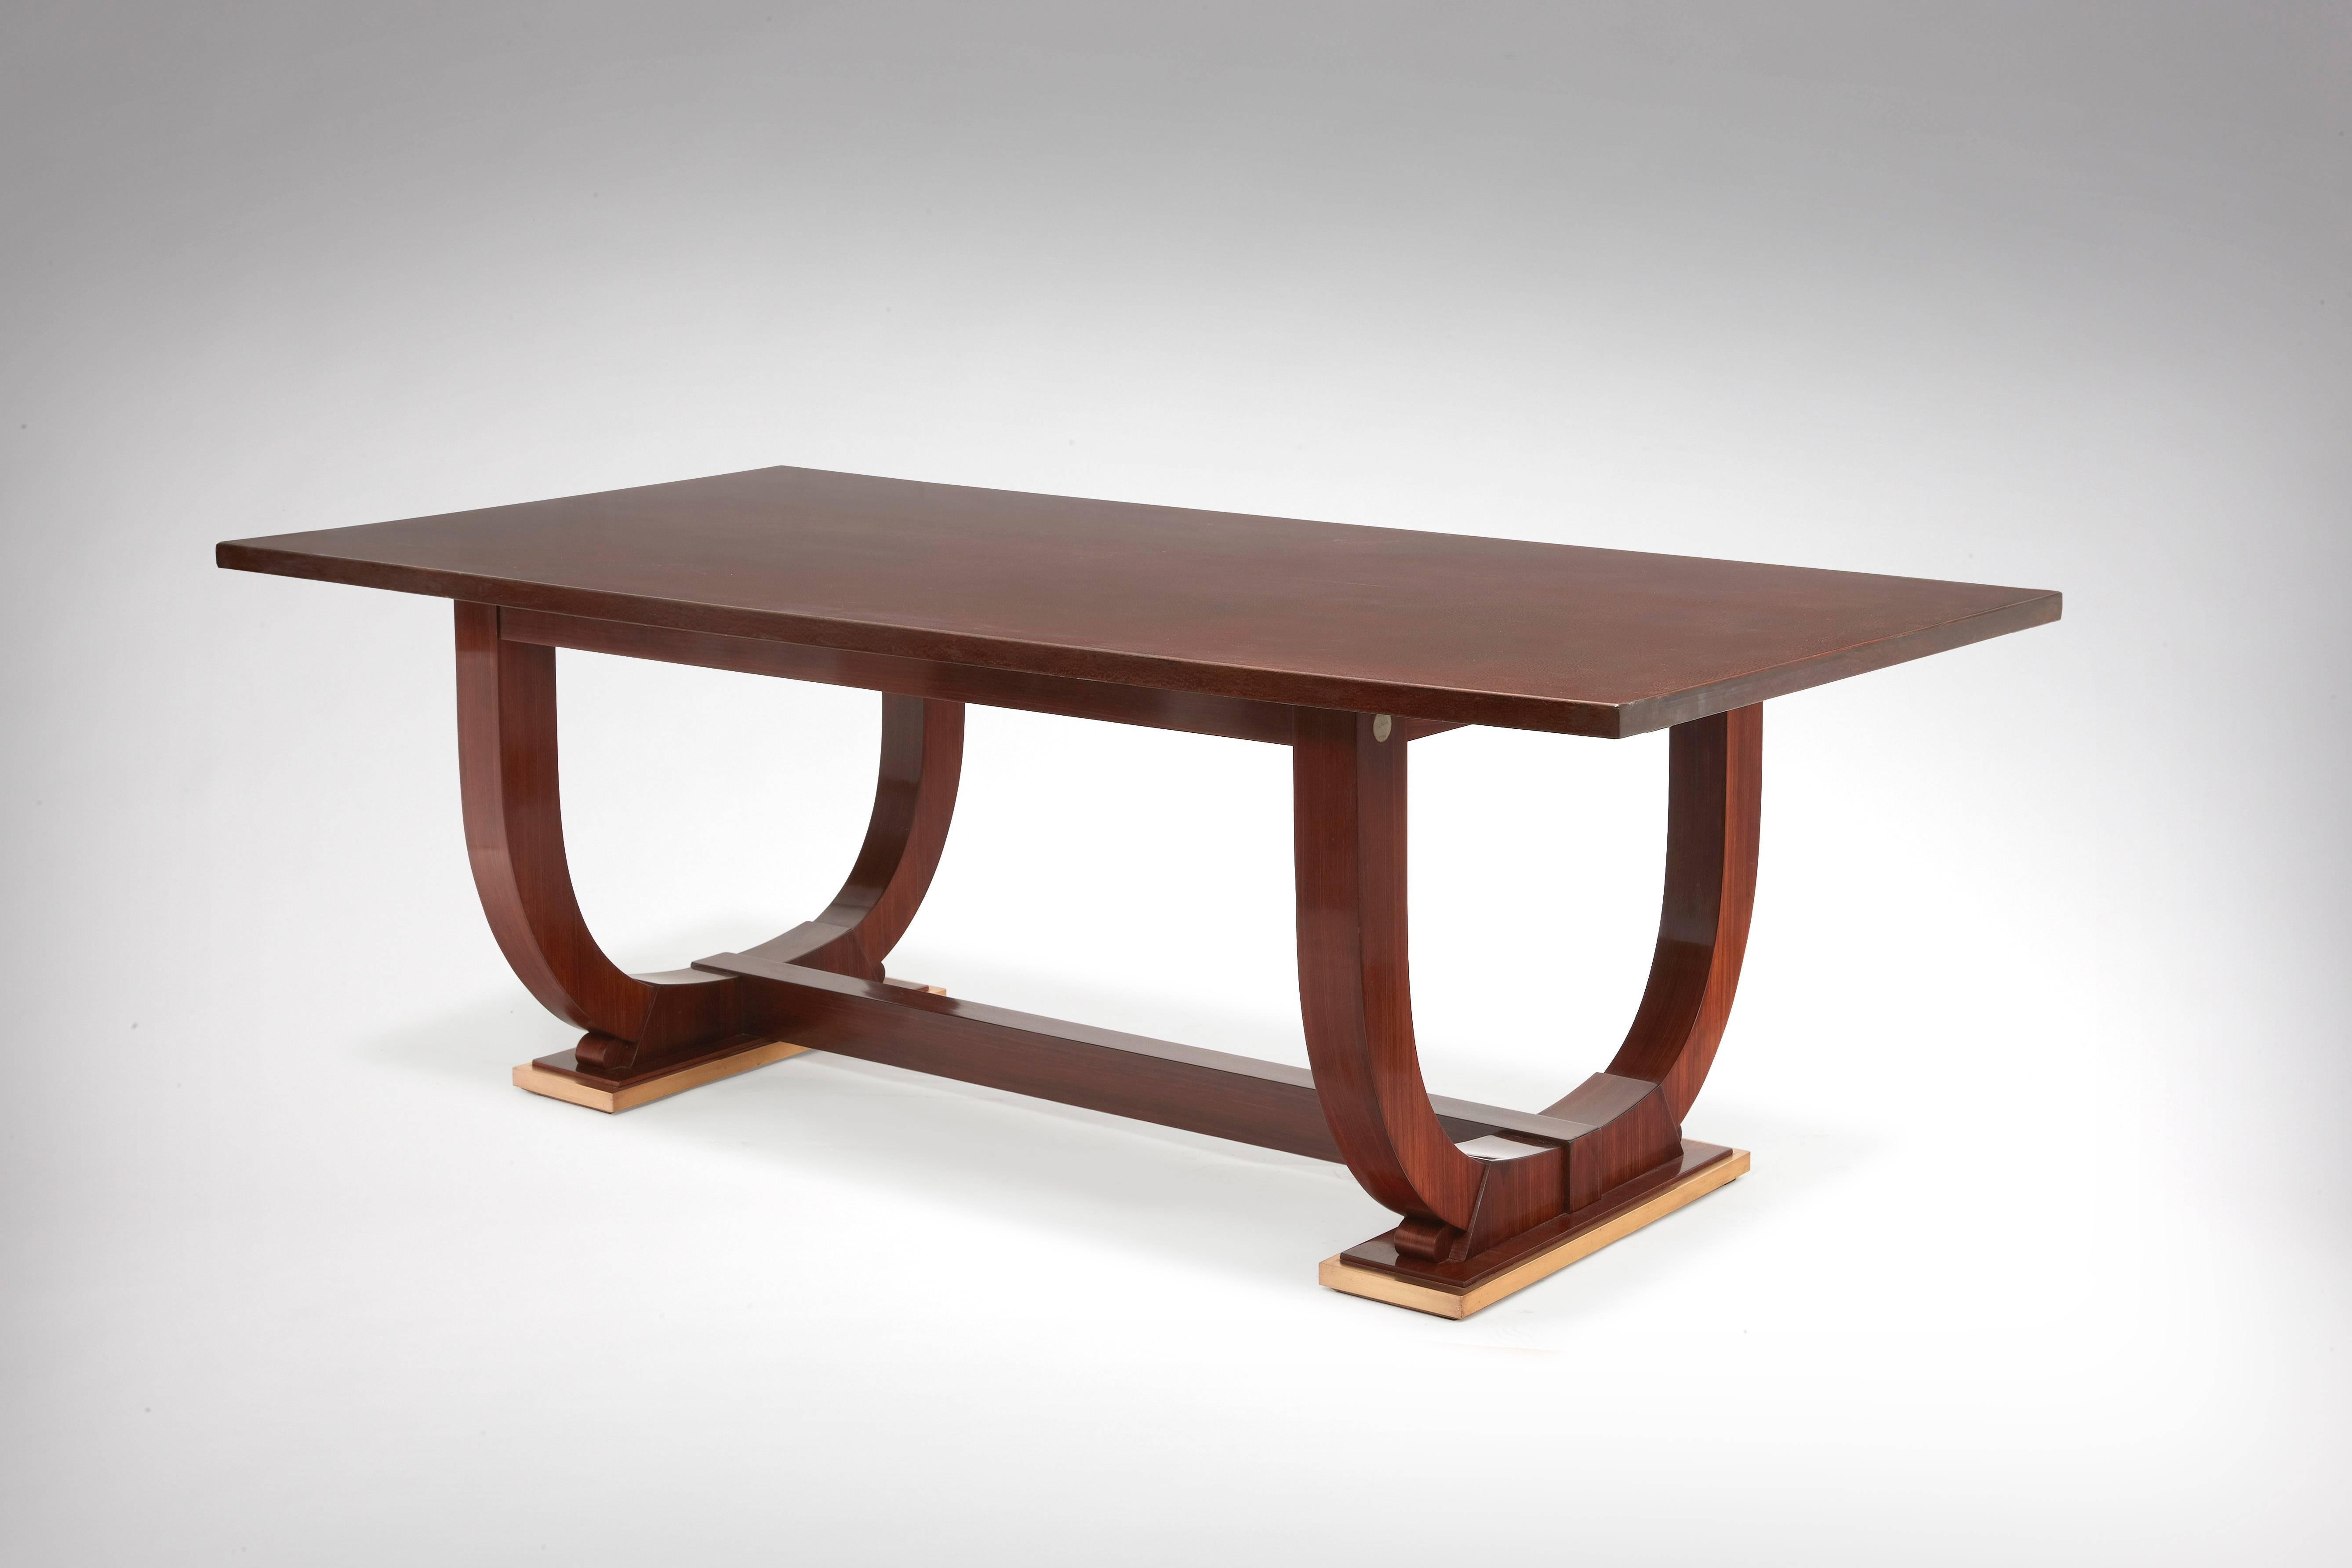 Dining room table in Brazilian rosewood veneer with a fully iridescent chamois lacquered rectangular tray (without extensions). U feet. Signed in a circular cartridge and dated 1936.

This model of dining-table was conceived in 1926 for Mr.